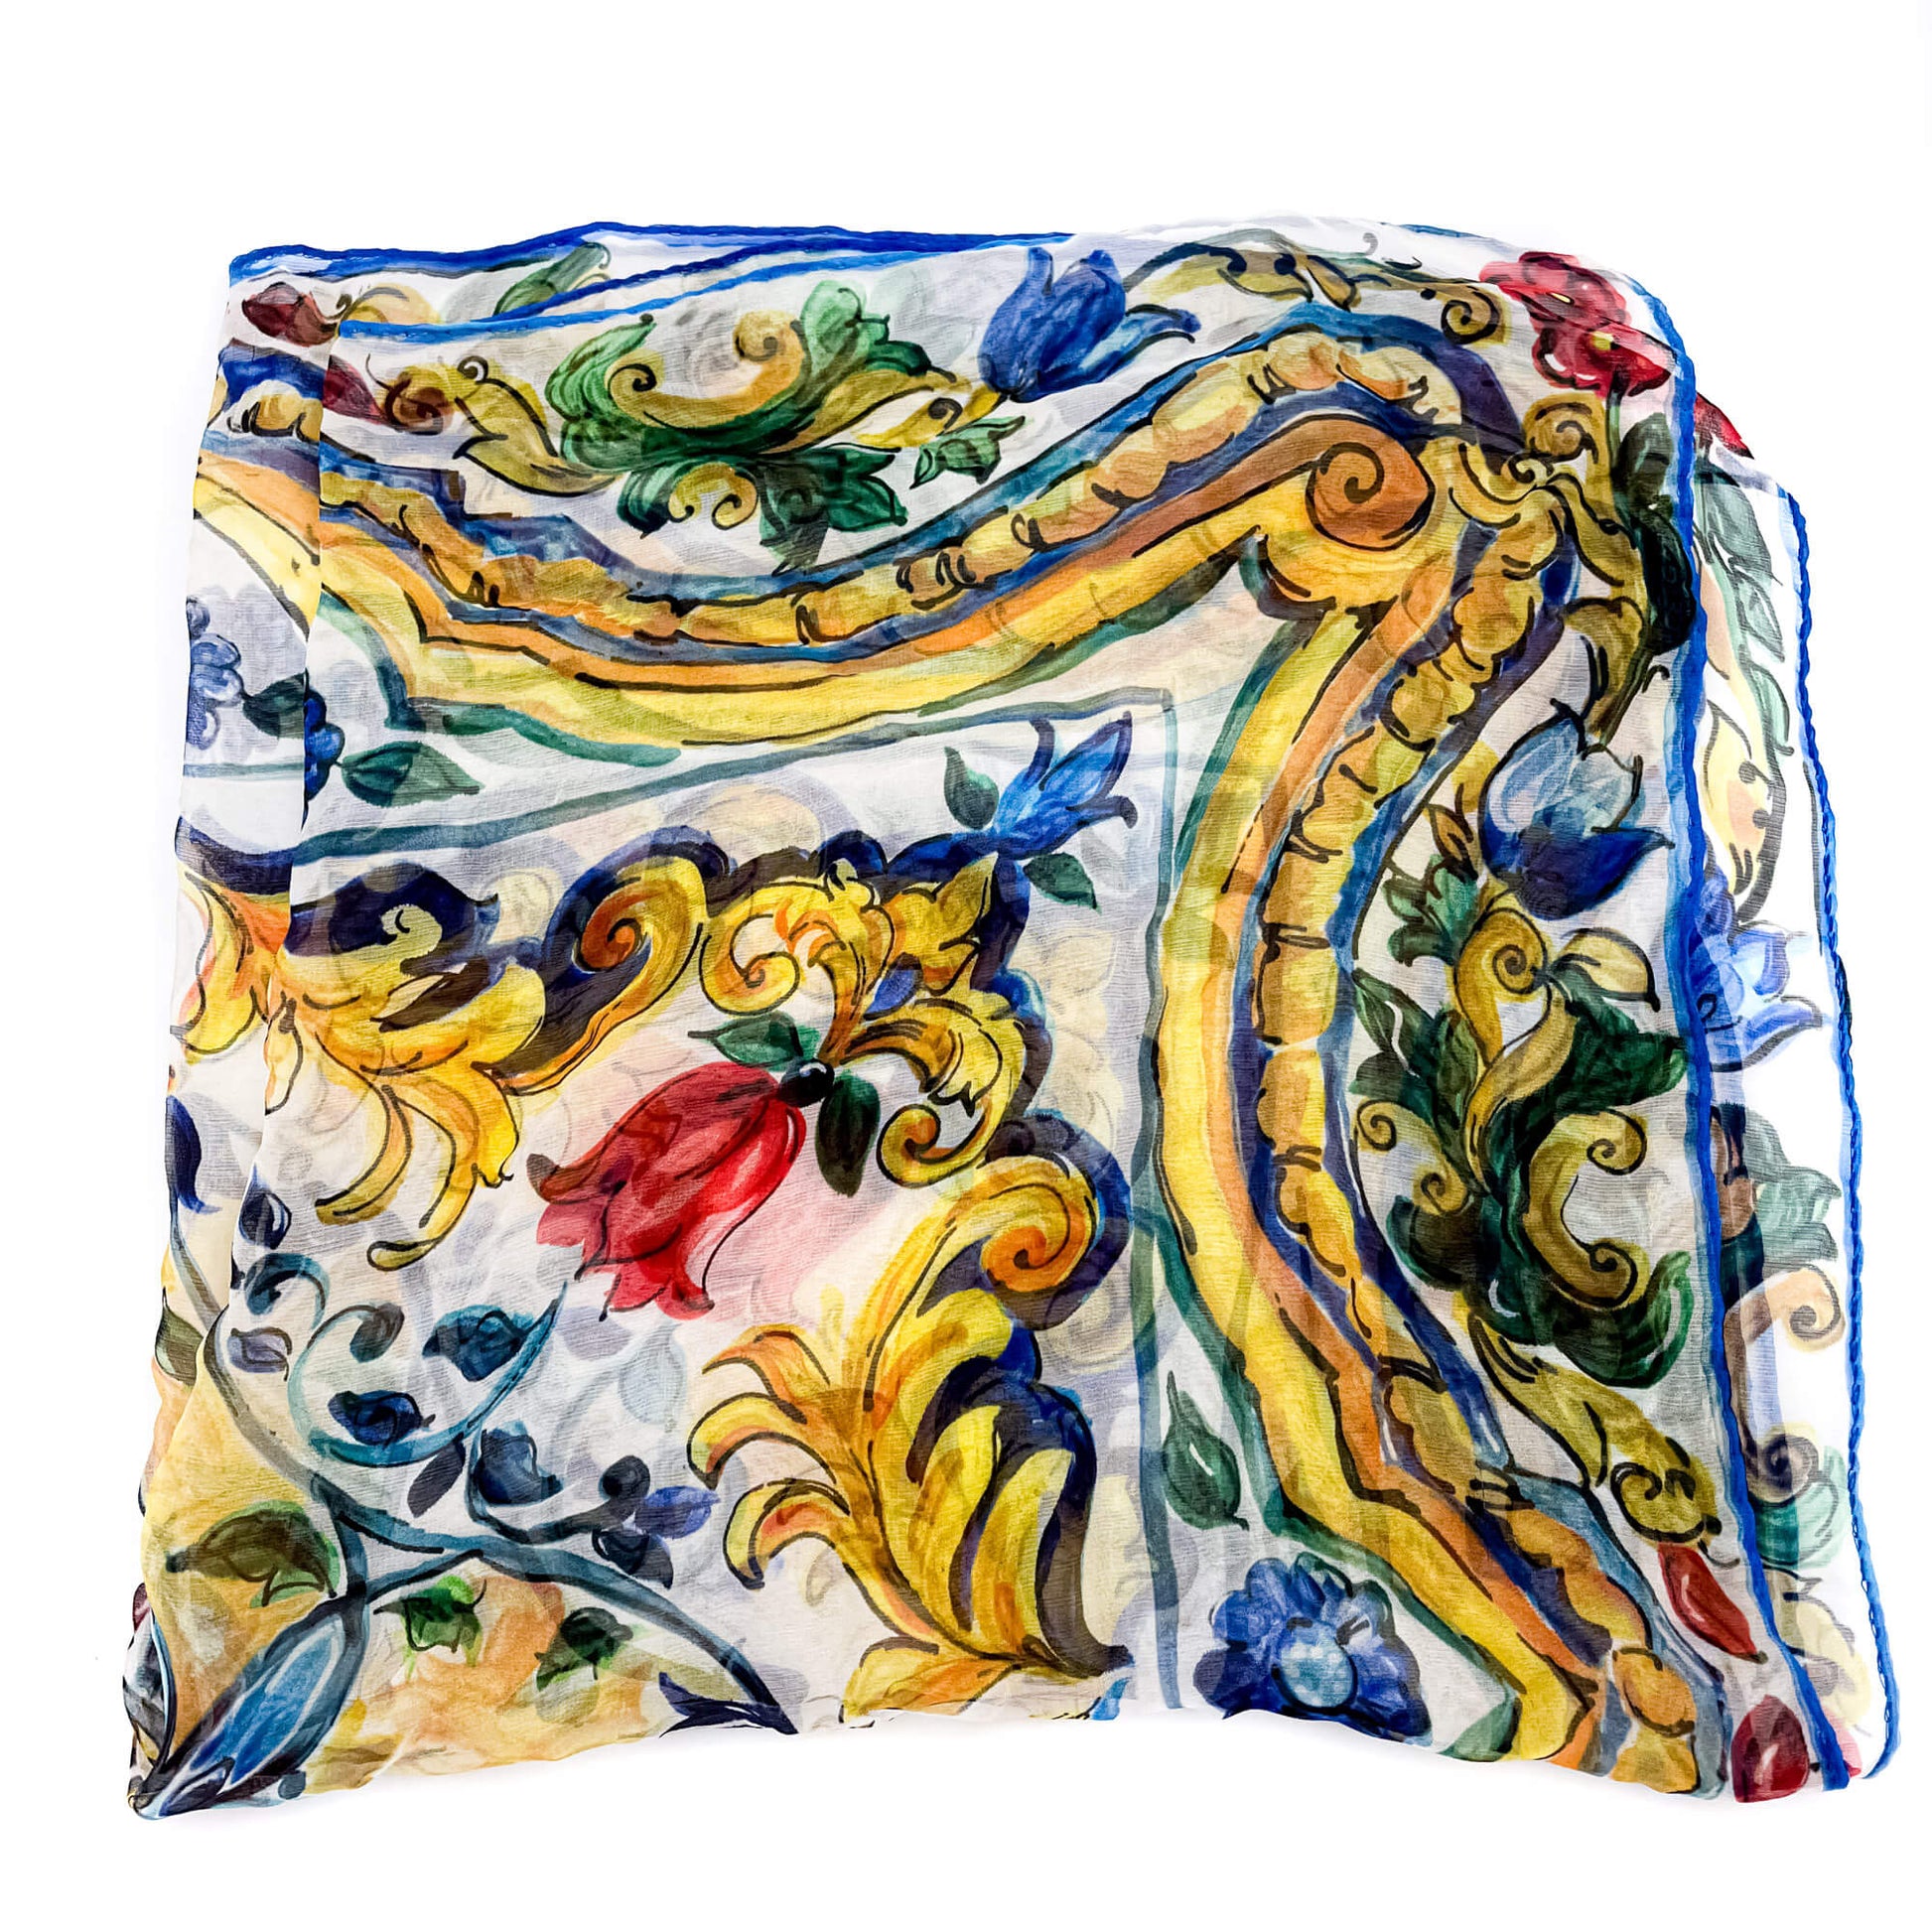 Dolce and Gabbana Large Pansy Printed Cotton Pareo Scarf Foulard